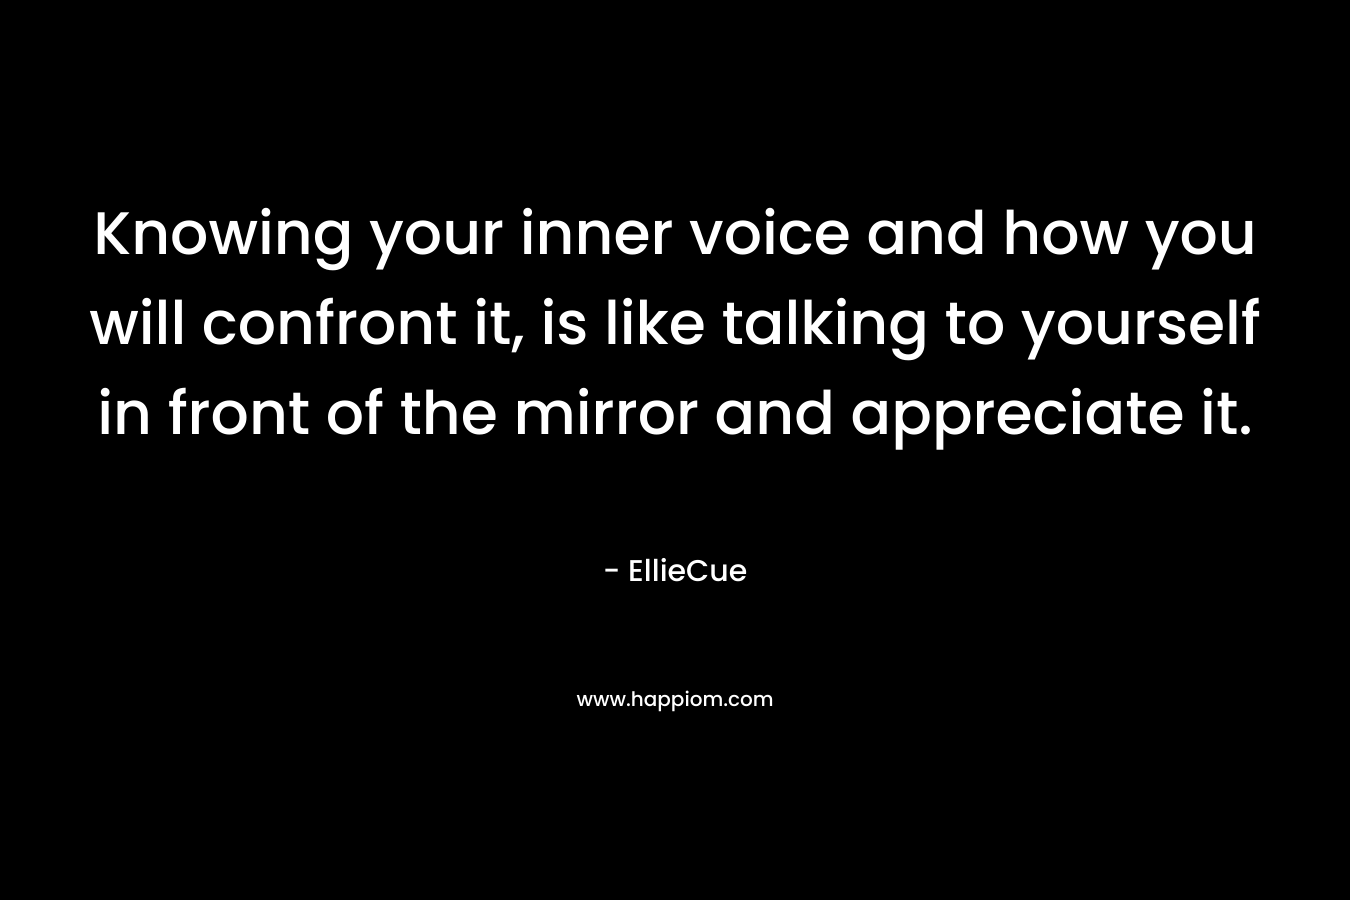 Knowing your inner voice and how you will confront it, is like talking to yourself in front of the mirror and appreciate it. – EllieCue